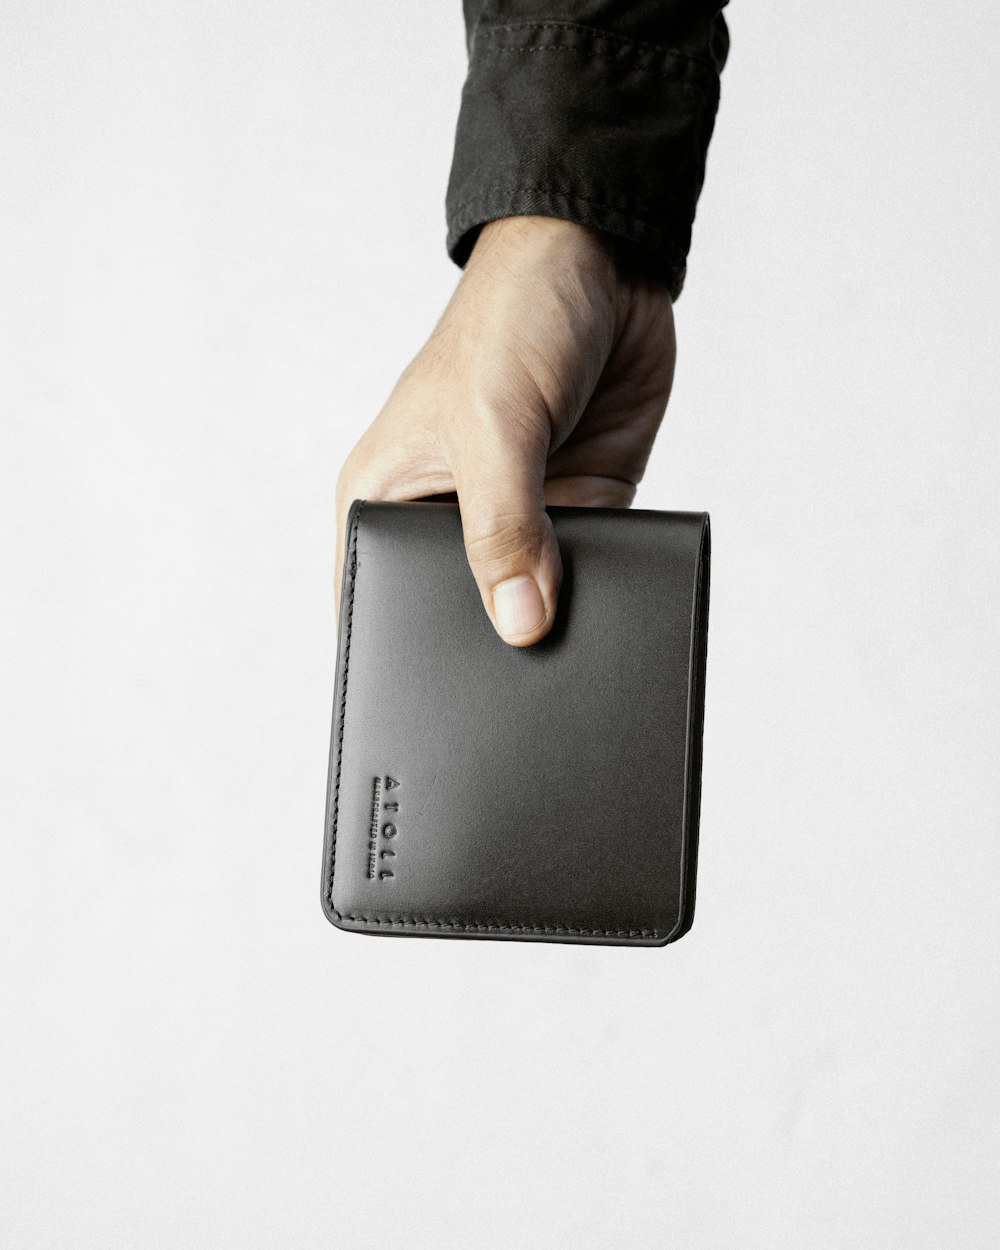 a hand holding a black leather wallet